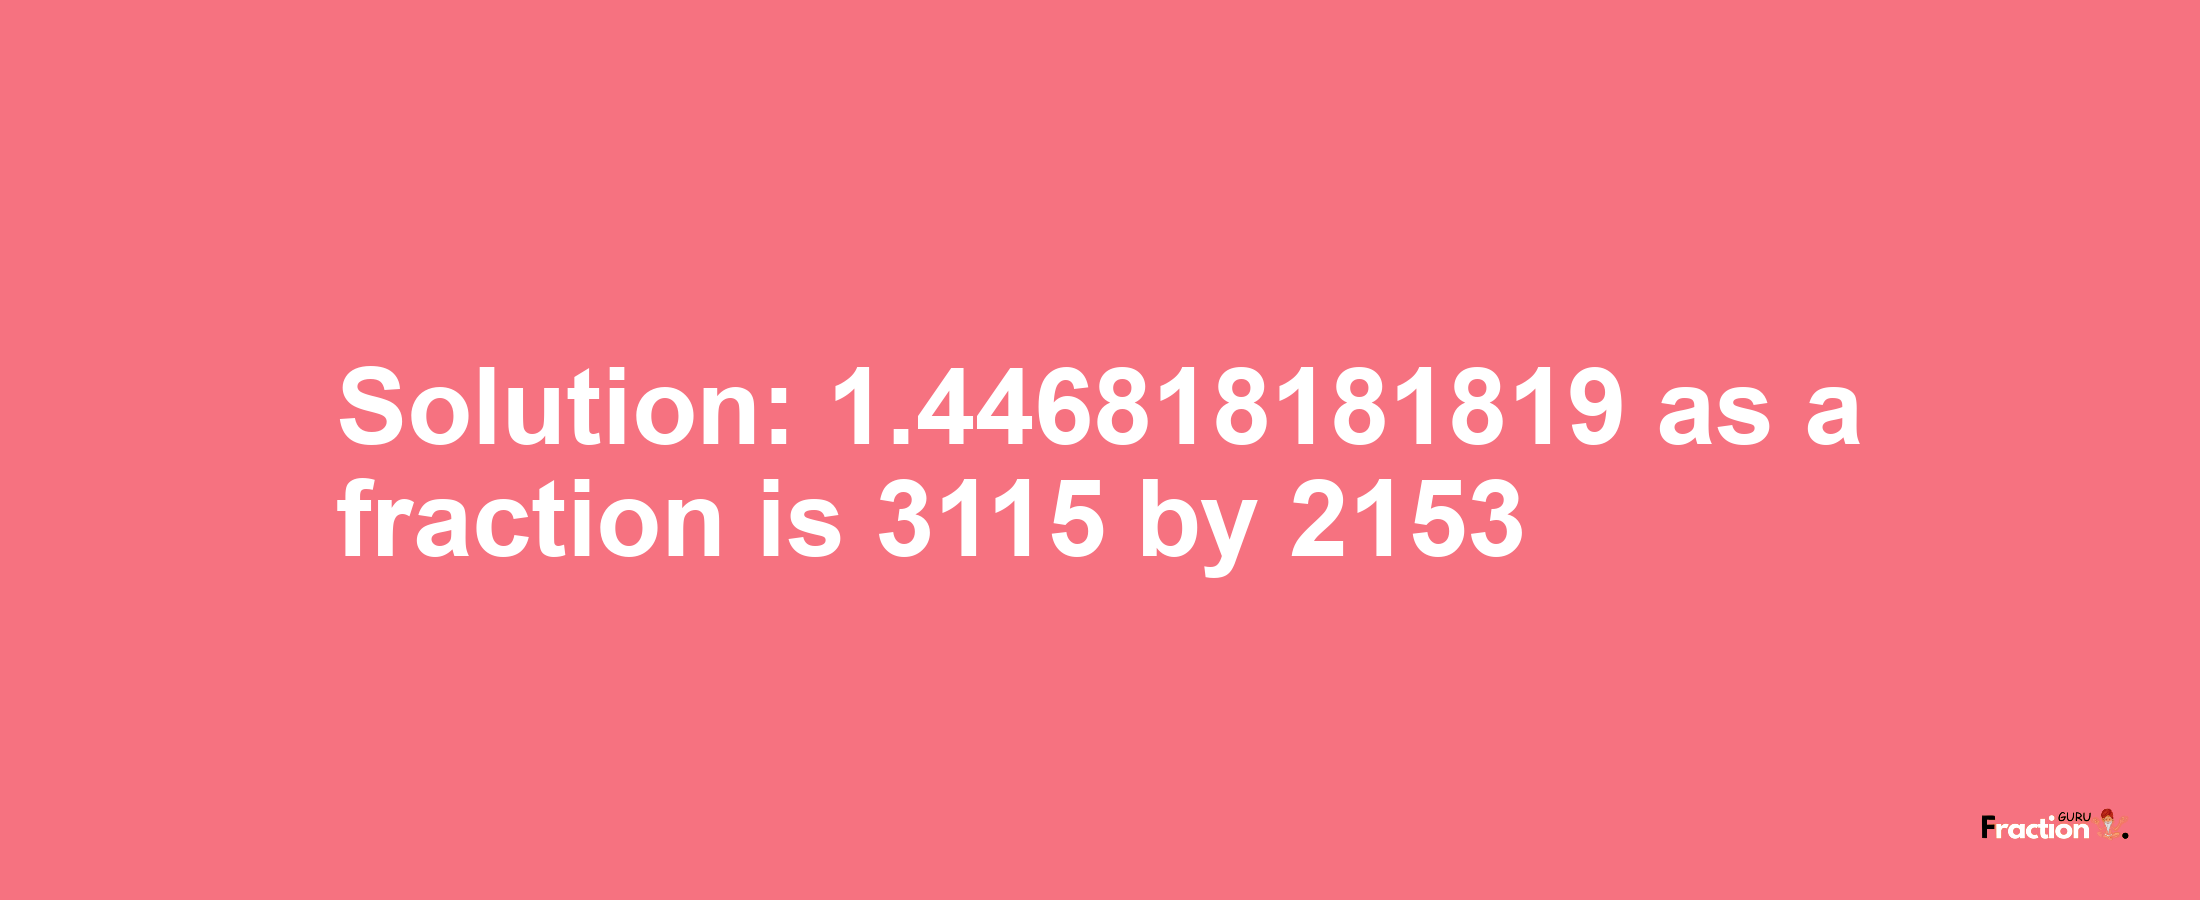 Solution:1.446818181819 as a fraction is 3115/2153